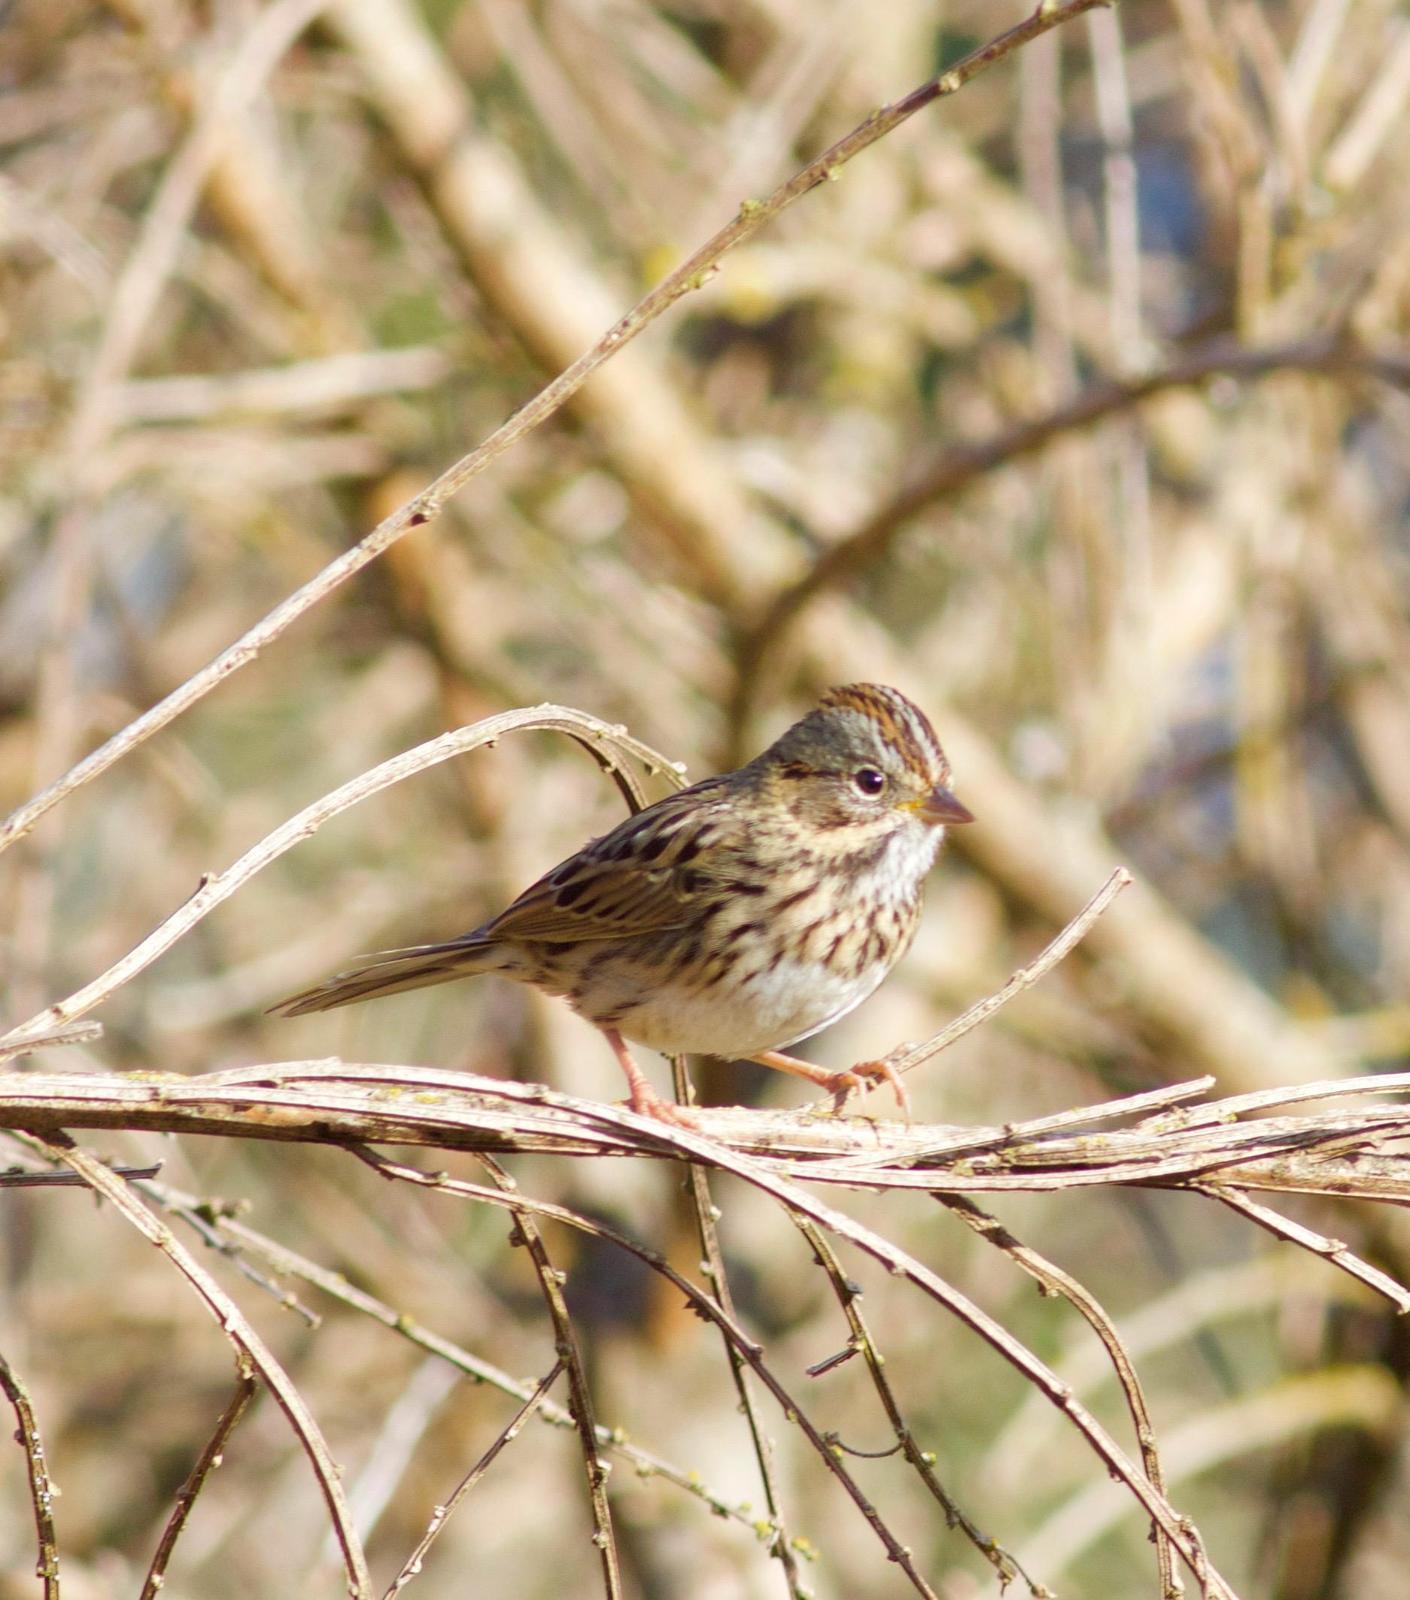 Lincoln's Sparrow Photo by Kathryn Keith